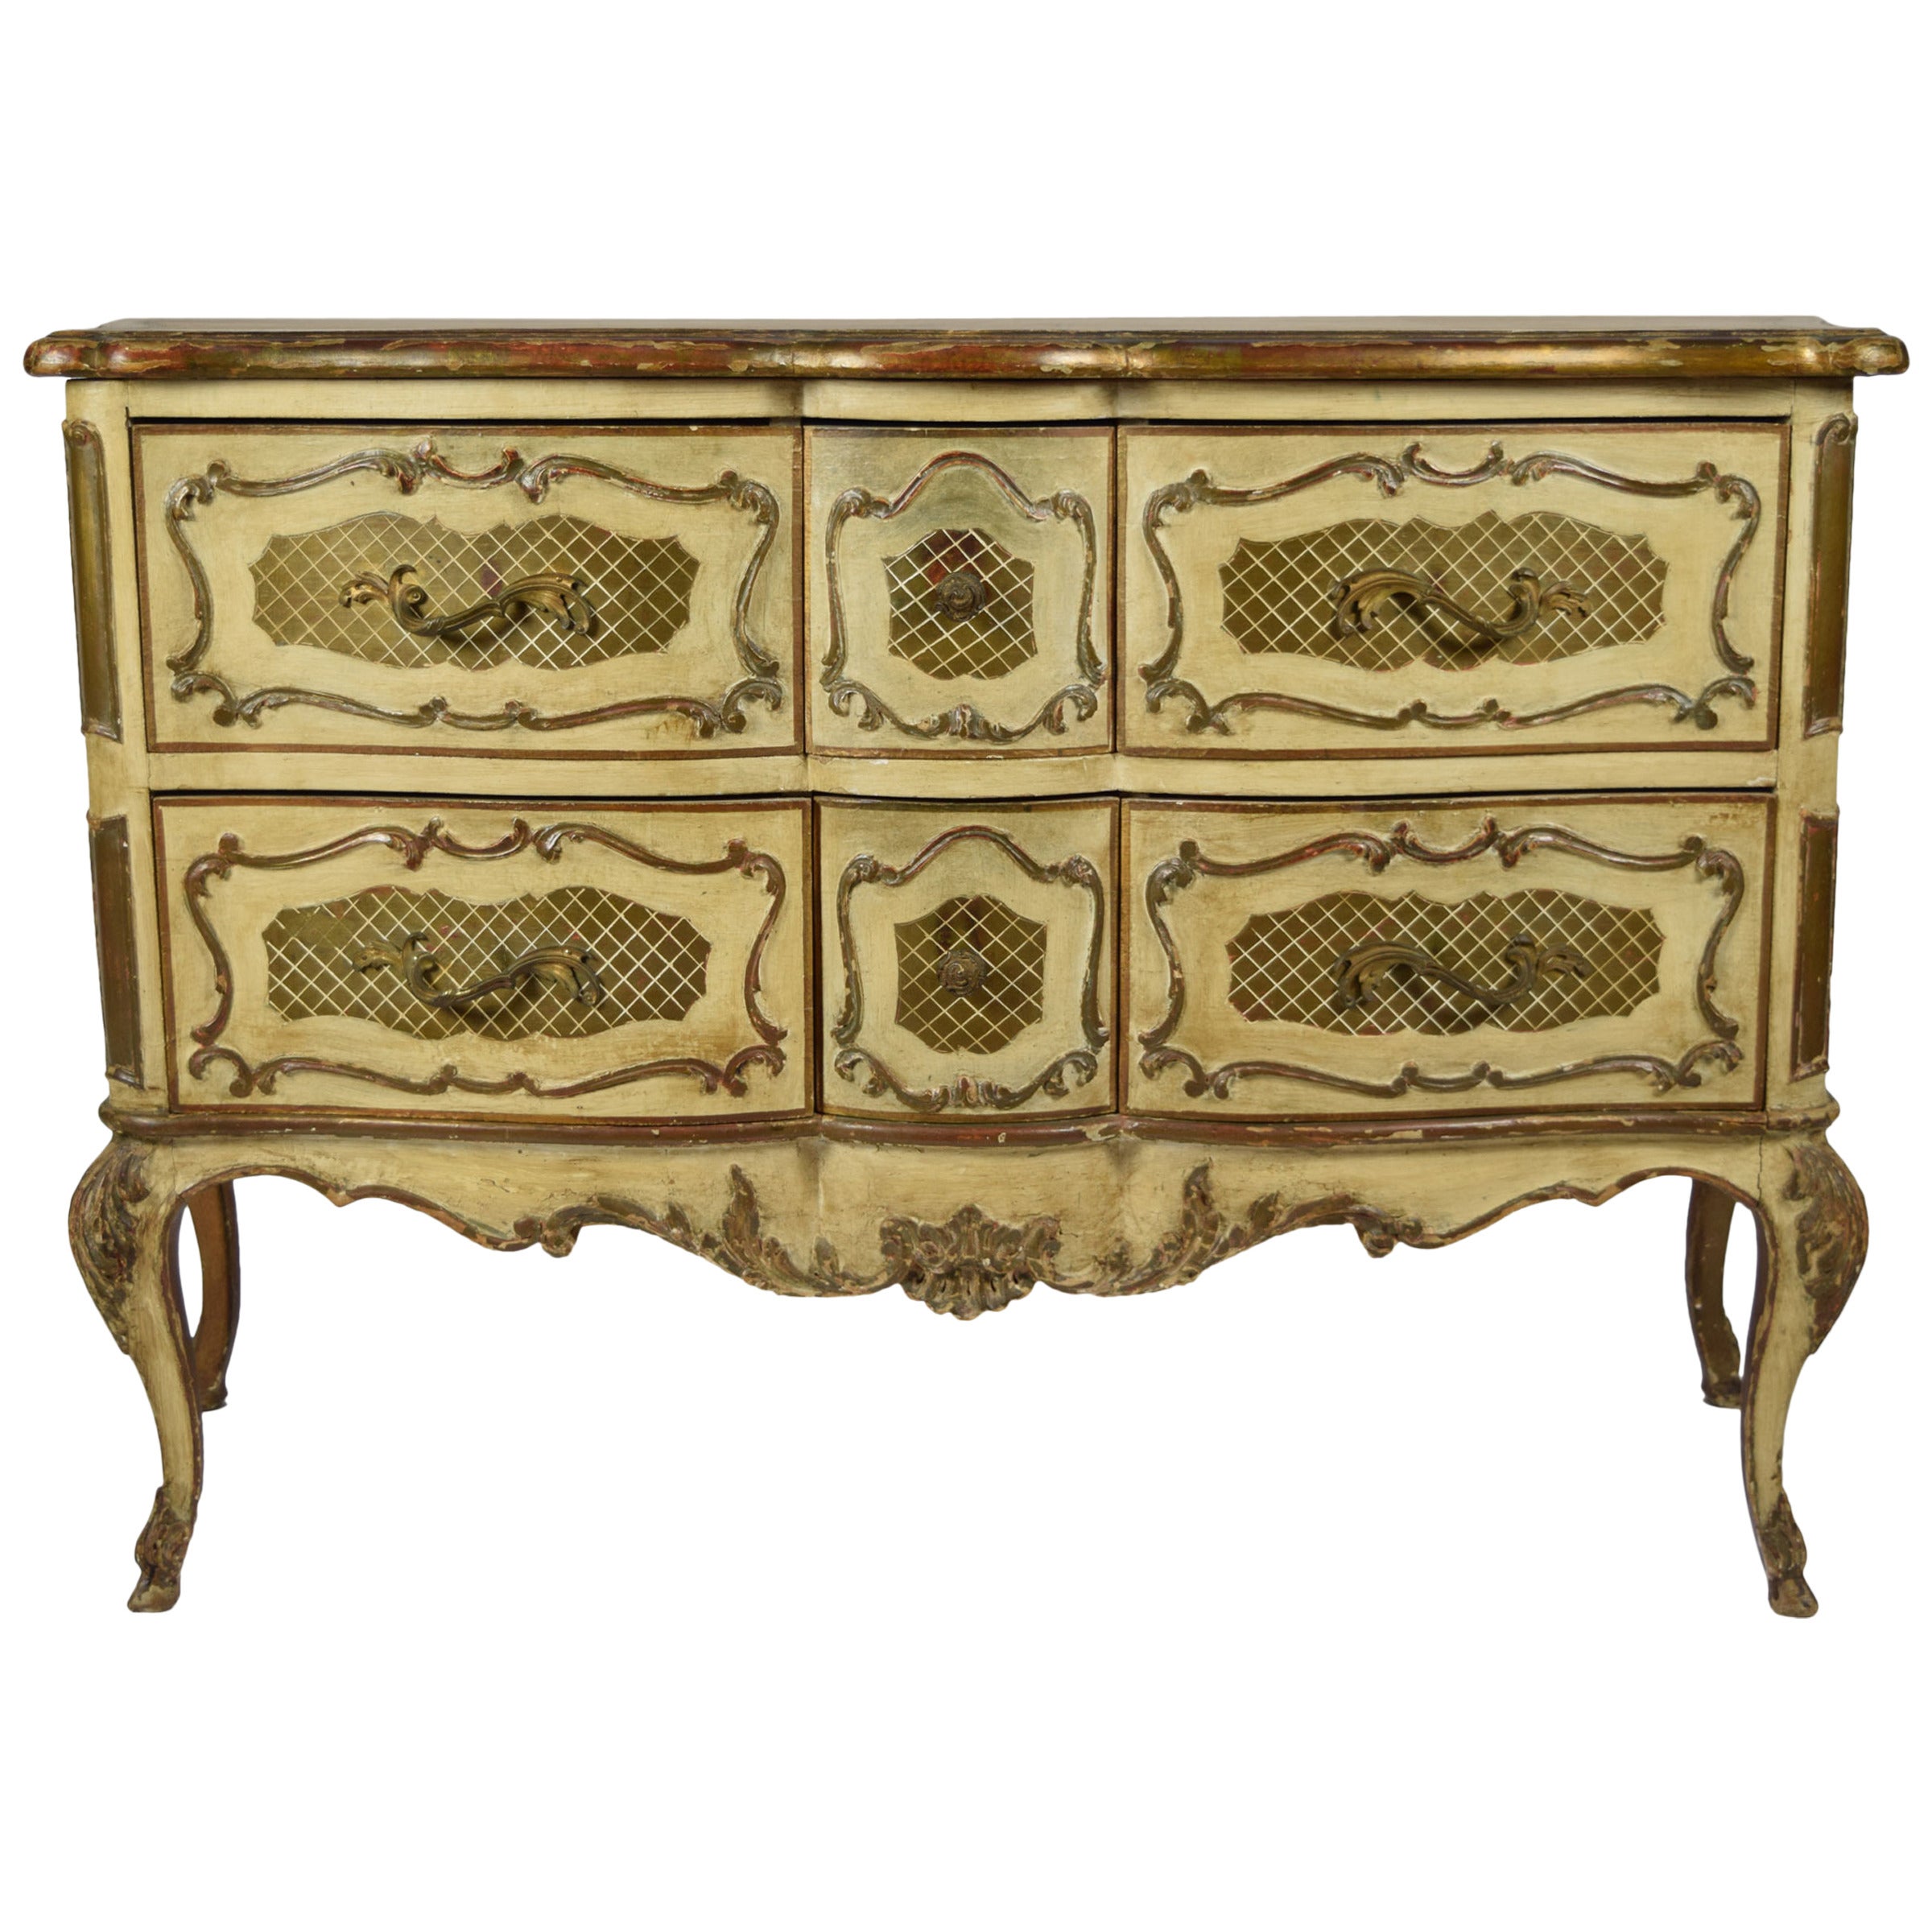 Italian Rococo Style Painted Commode